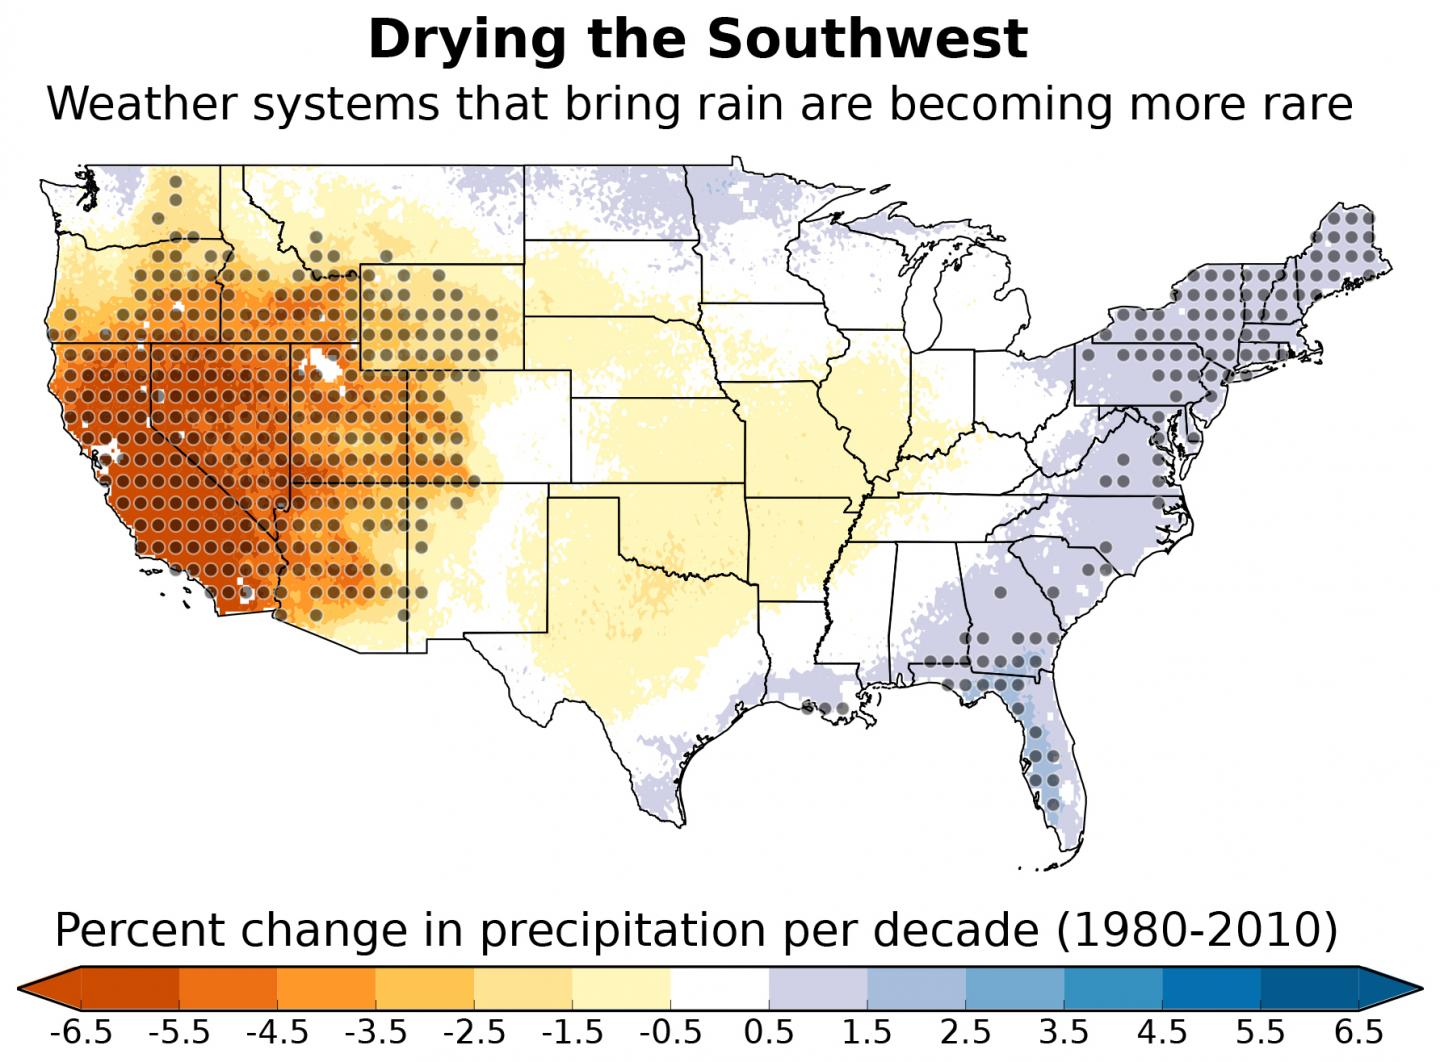 Drying the Southwest